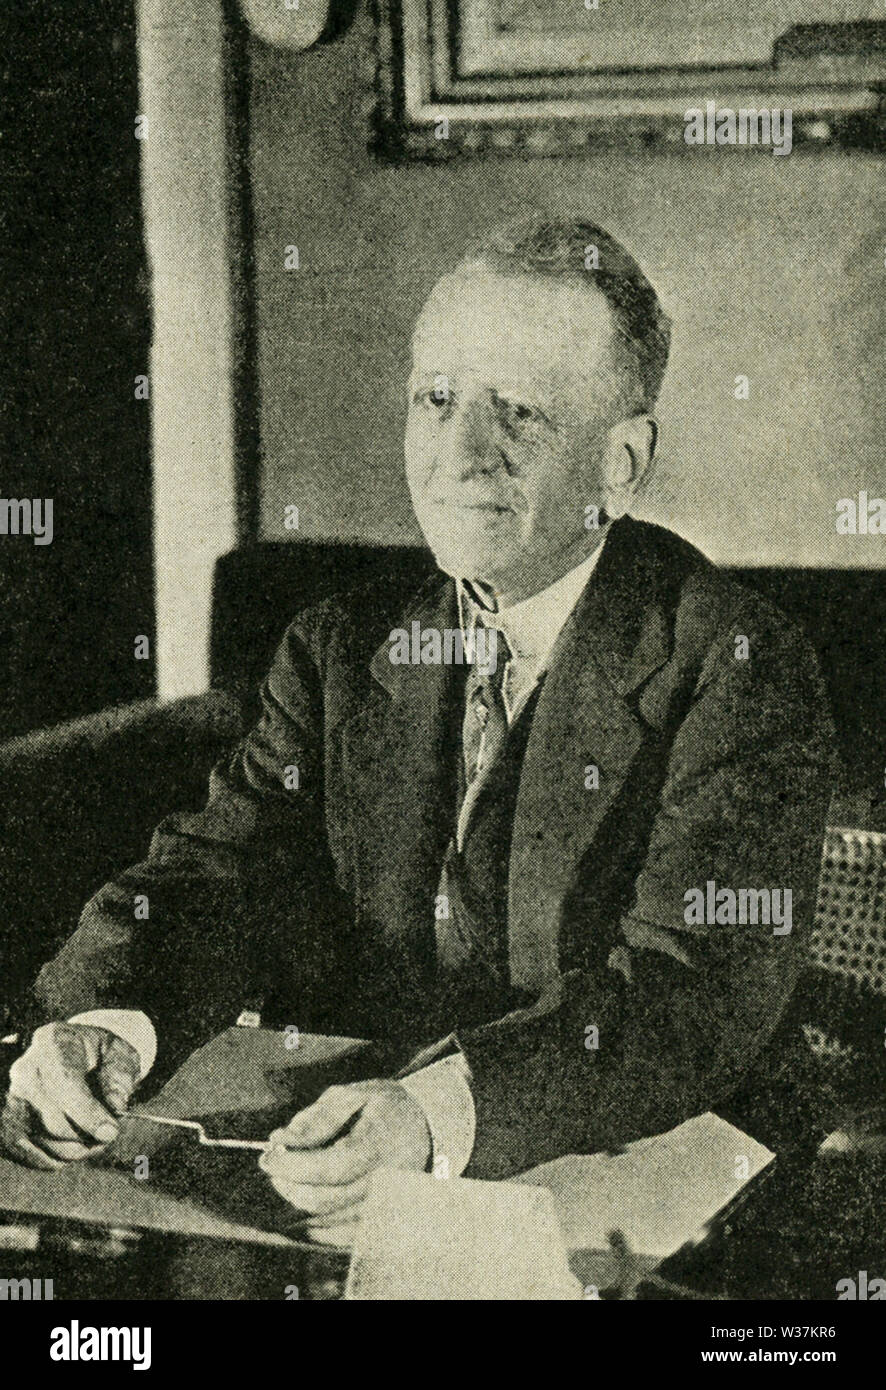 The caption on this photo that dates to the early 1920s reads: Carter Glass, who succeeded Wm. G. McAdoo as Secretary of the Treasury Stock Photo